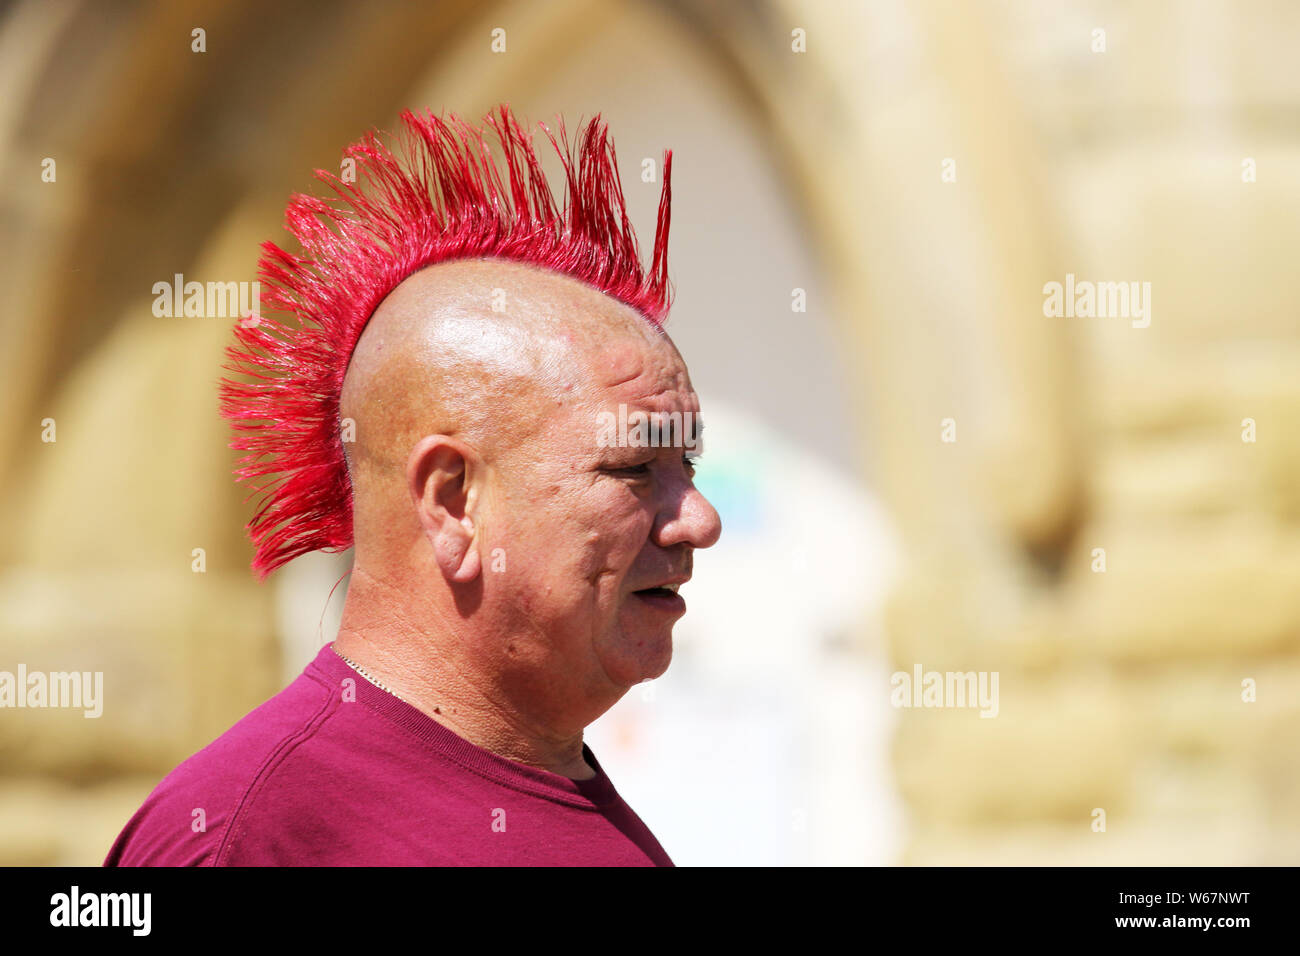 Blackpool, Lancashire, UK. 31st July, 2019. The fabulous Punk Rebellion festival returns to the Winter Gardens in Blackpool for a weekend of live punk rock music. The Rebellion Festival, formerly Holidays in the Sun and the Wasted Festival is a British punk rock festival first held in 1996. This open to all event draws thousands of overseas visitors to see all their favourite punk musicians in one place. Credit: Cernan Elias/Alamy Live News Stock Photo